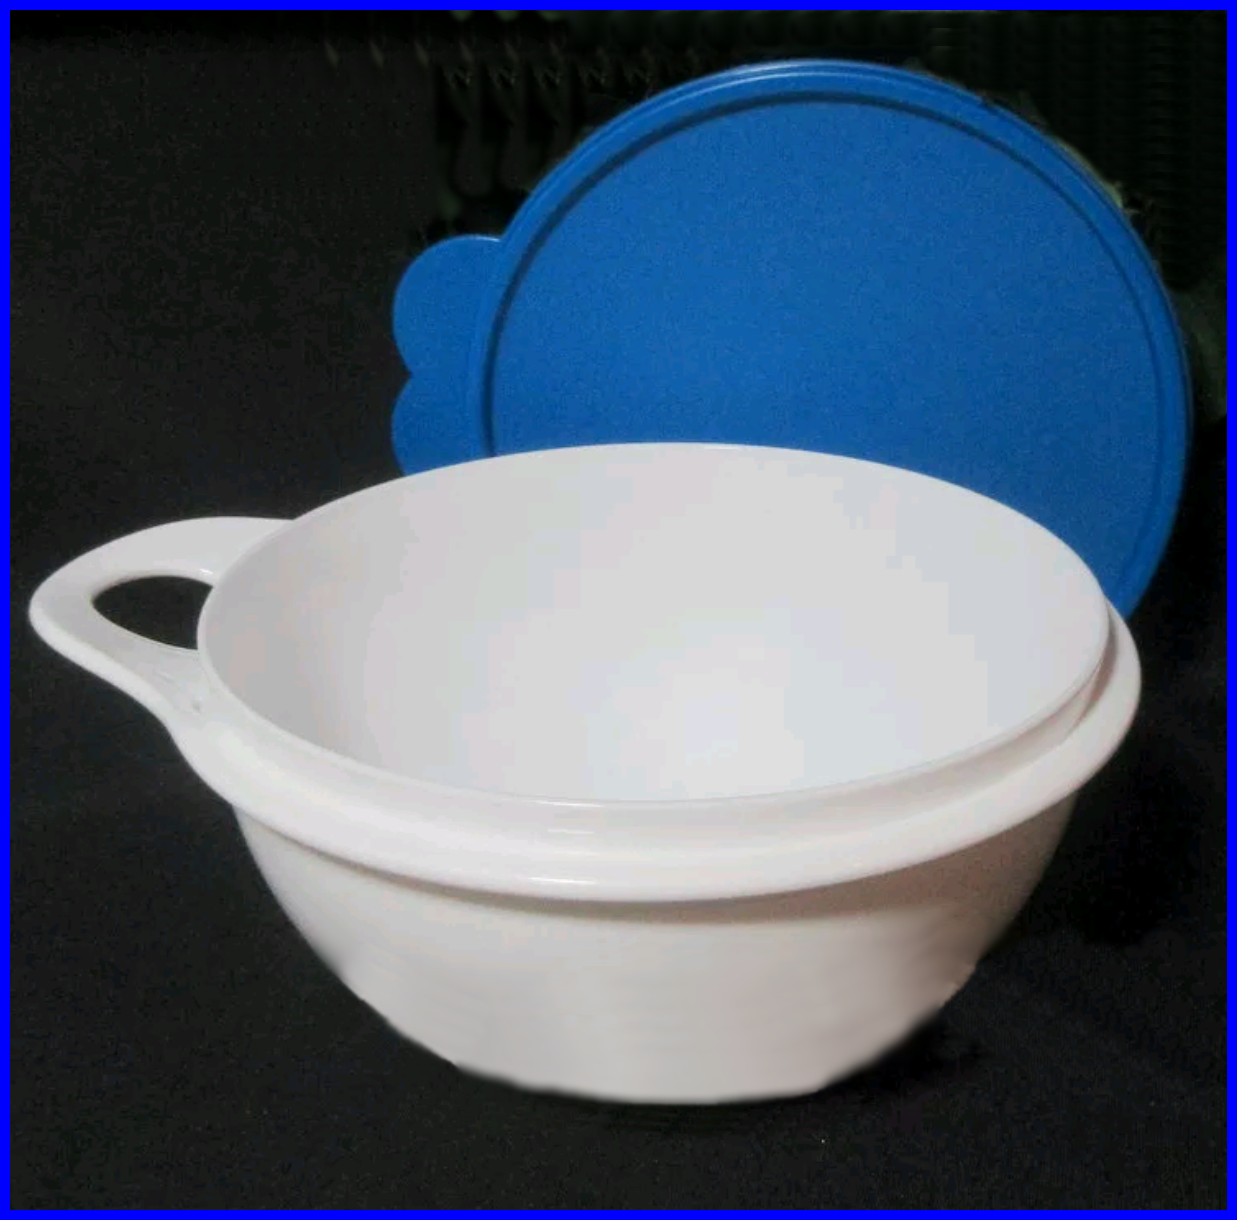 TUPPERWARE THAT'S A BOWL MINI 6-c SNOW WHITE BOWL w/ BLUE TABBED SEAL - Plastic Glass and Wax ~ PGW